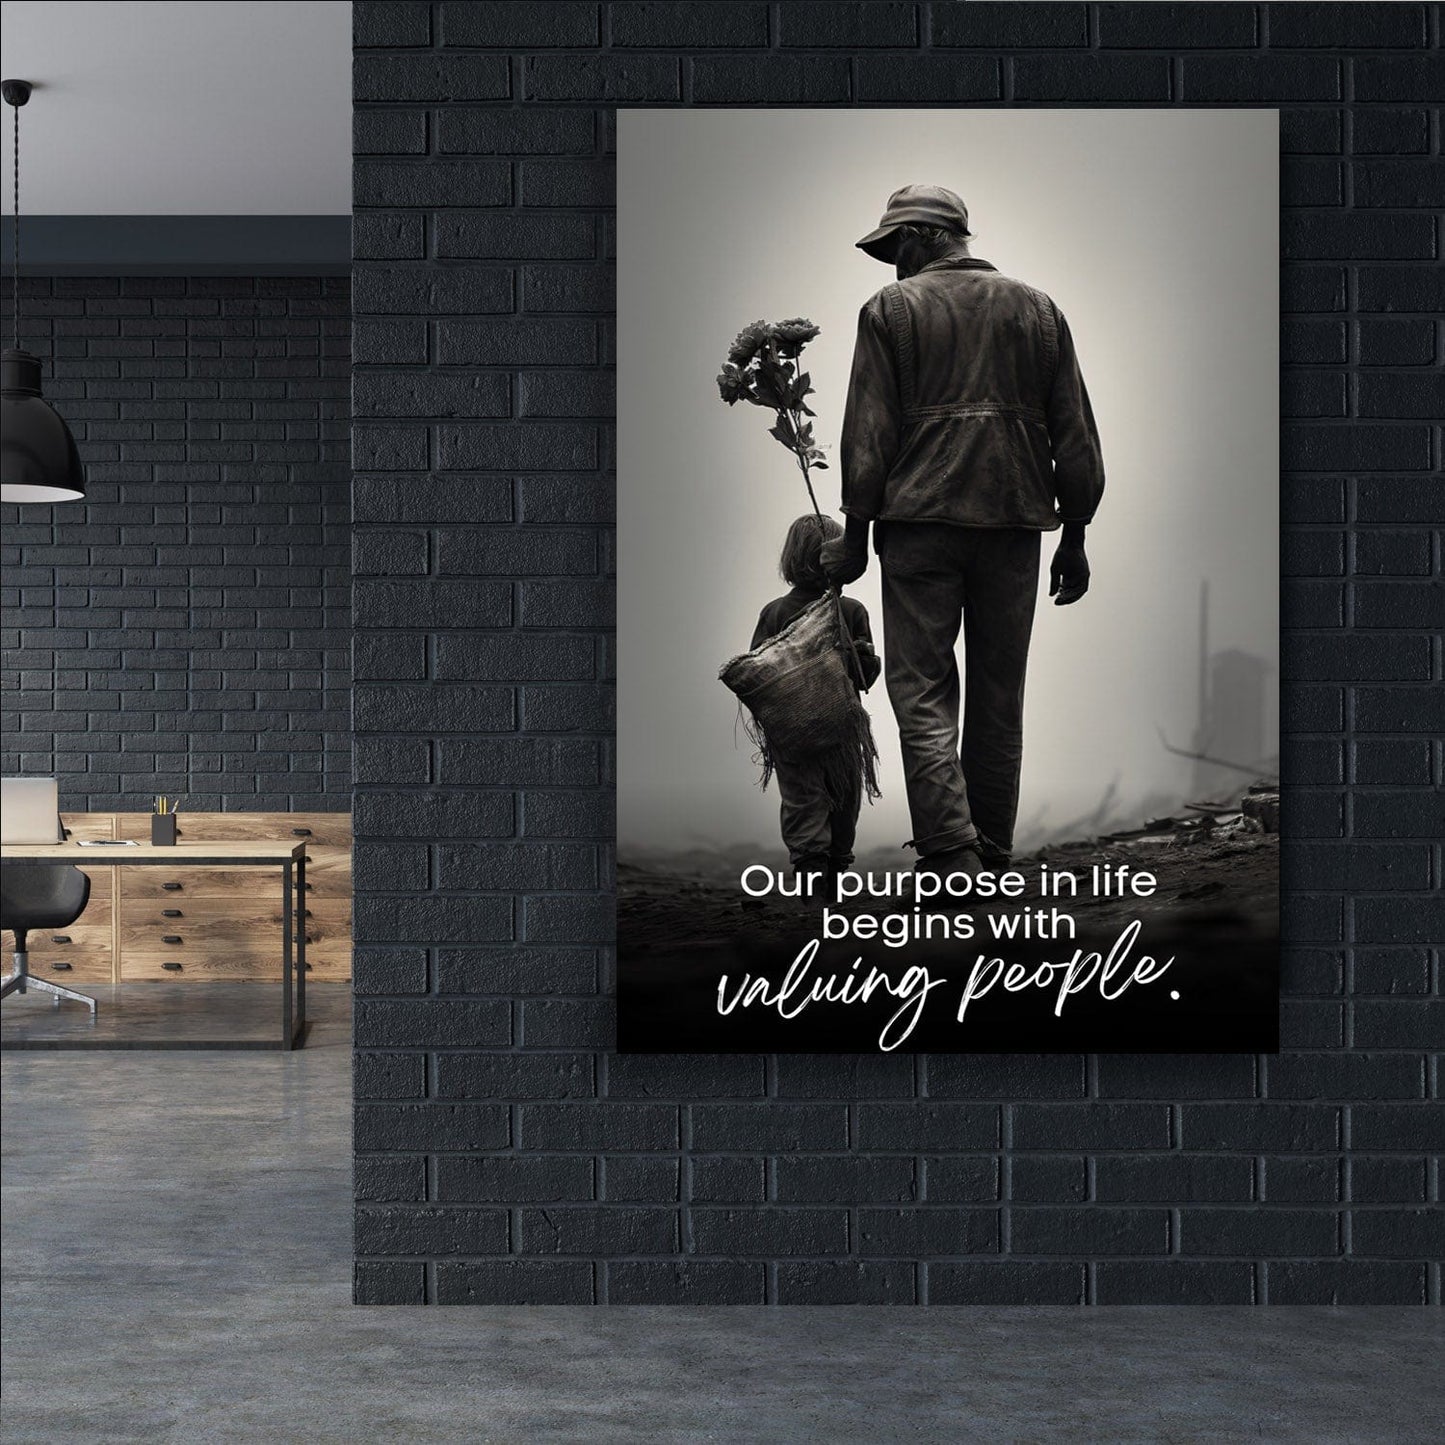 Our purpose in life begins with valuing people. - John Maxwell Inspired Wall Art | Inspirational Wall Art Motivational Wall Art Quotes Office Art | ImpaktMaker Exclusive Canvas Art Portrait